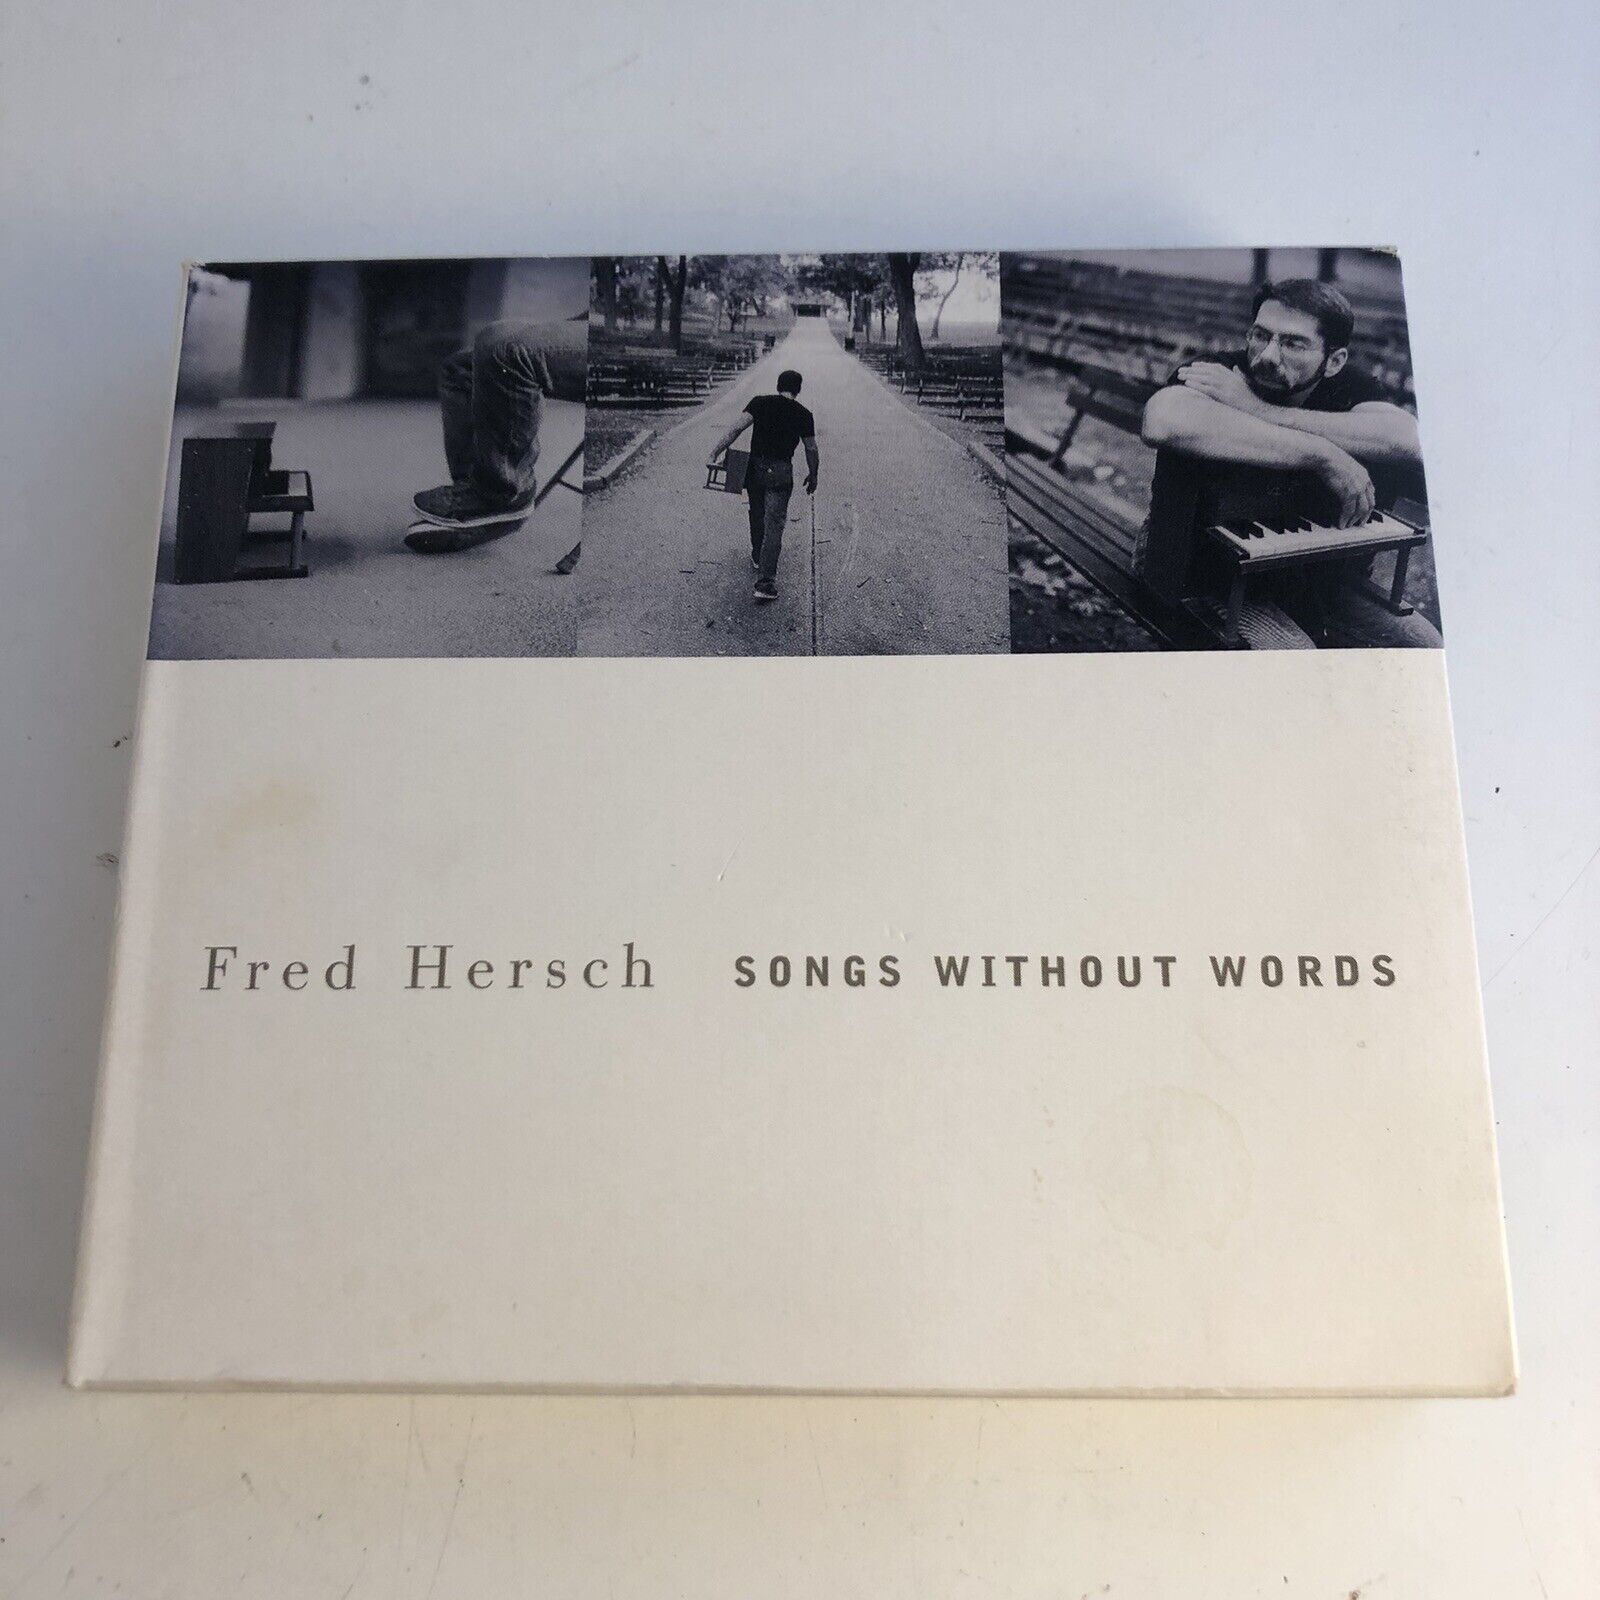 Songs Without Words by Fred Hersch (CD, Mar-2001, 3 Discs, Elektra) Jazz Piano